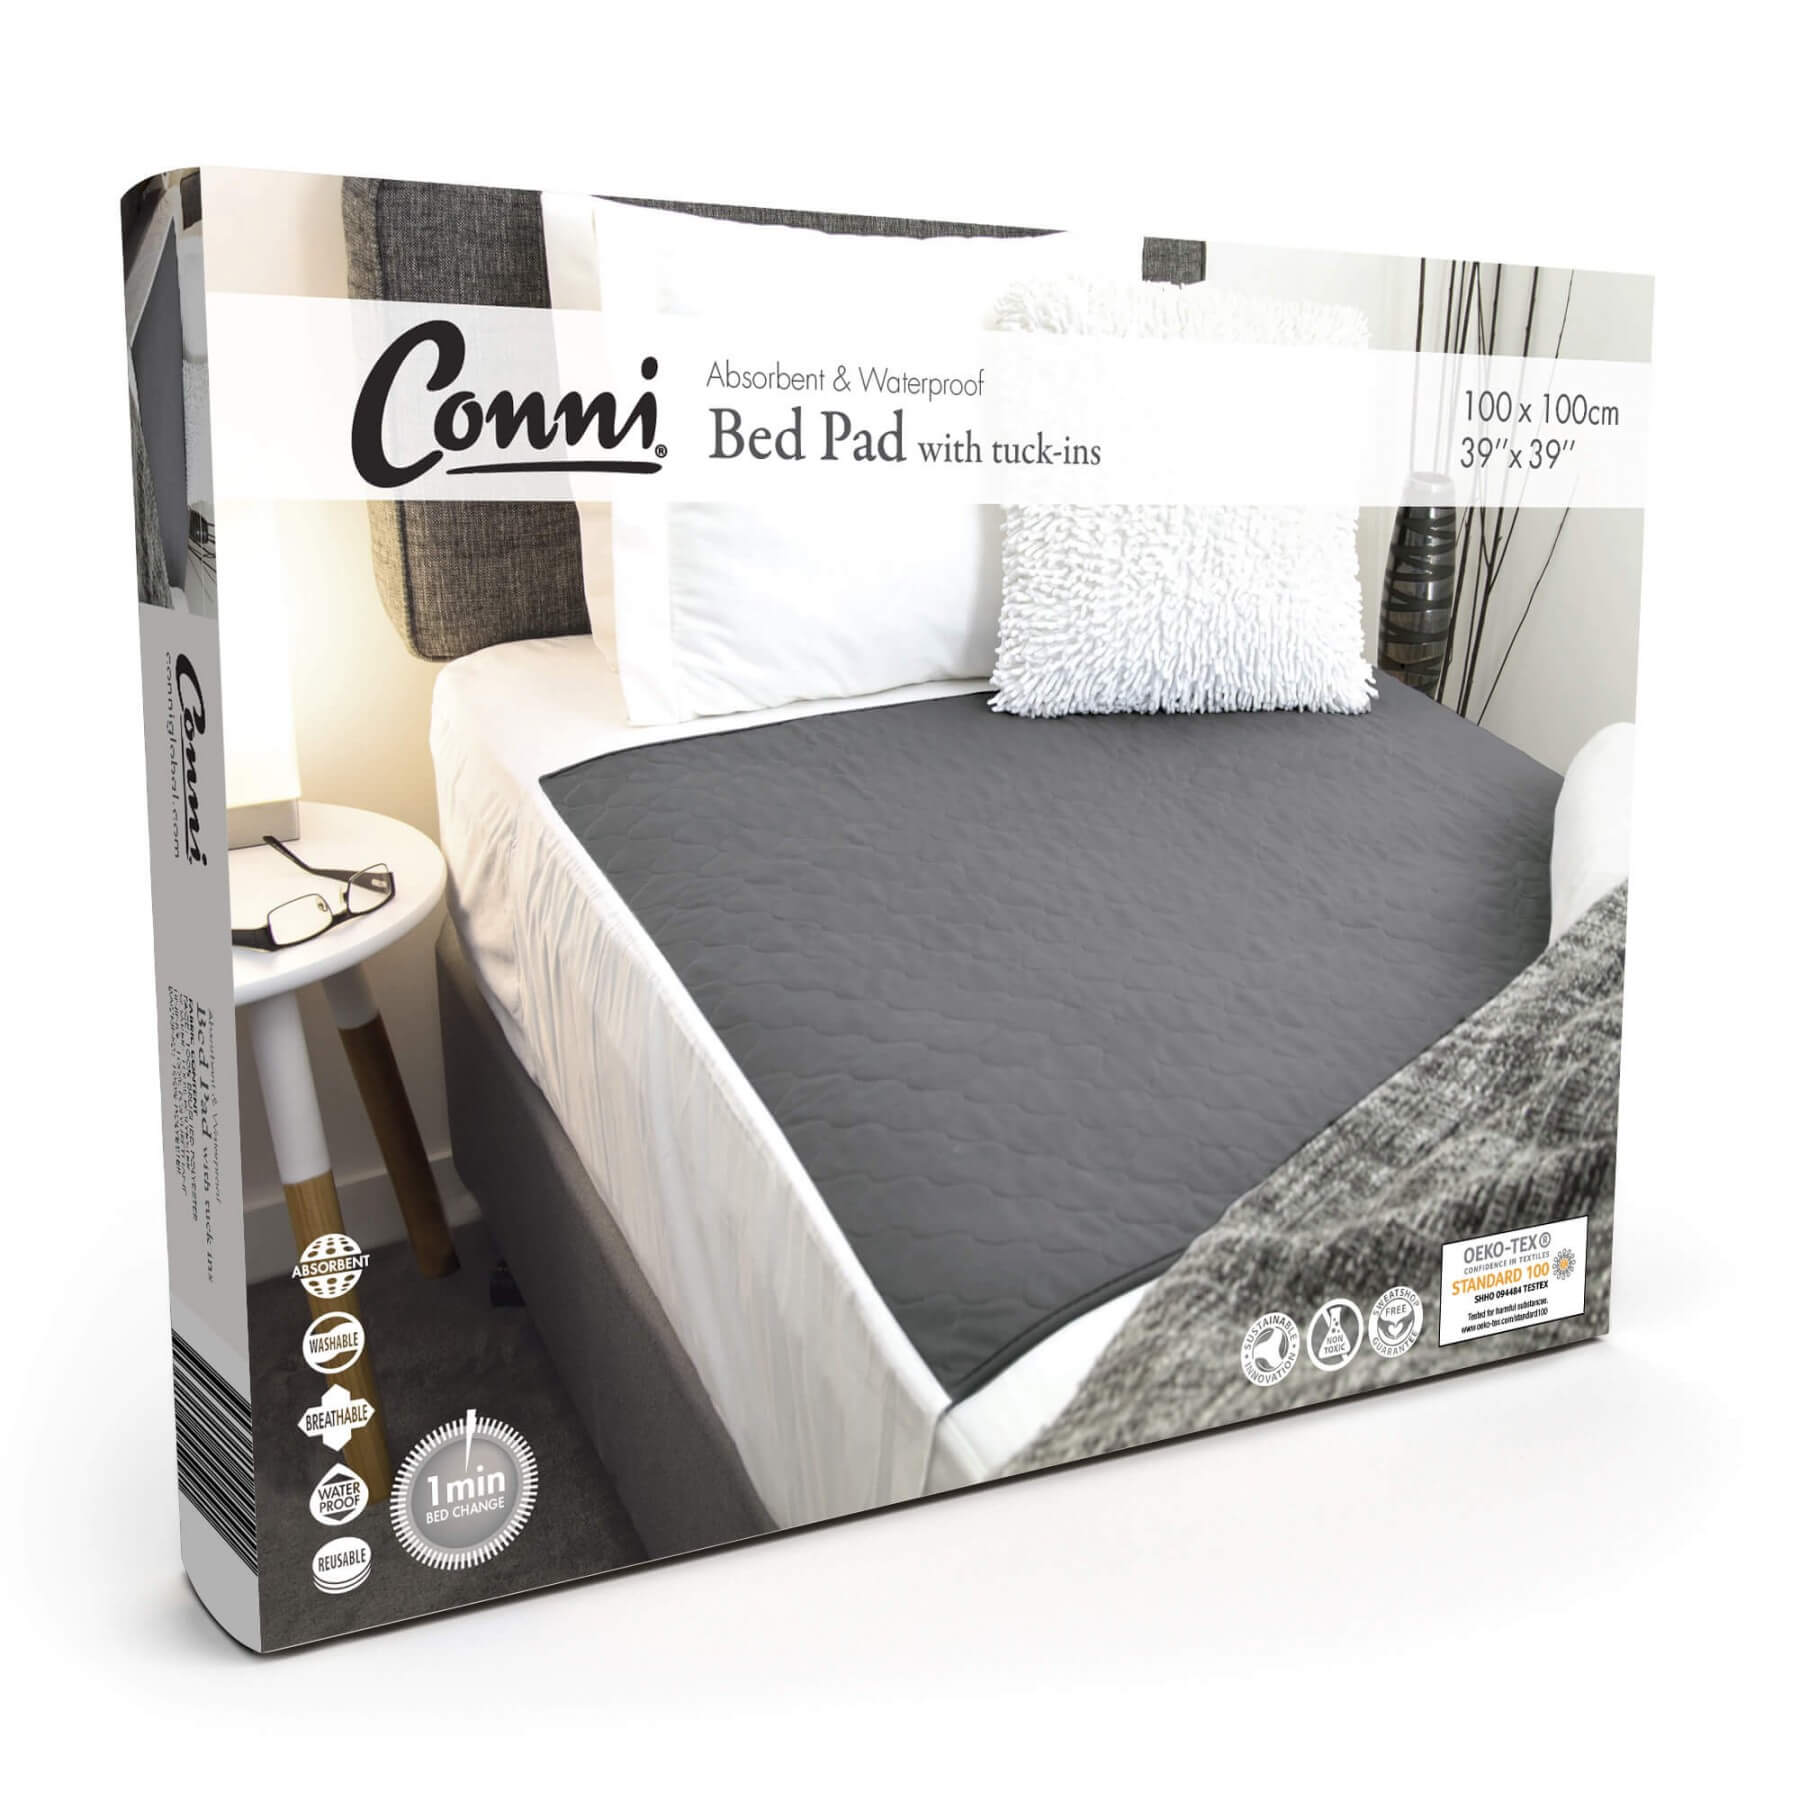 CONNI BED PAD WITH TUCK IN